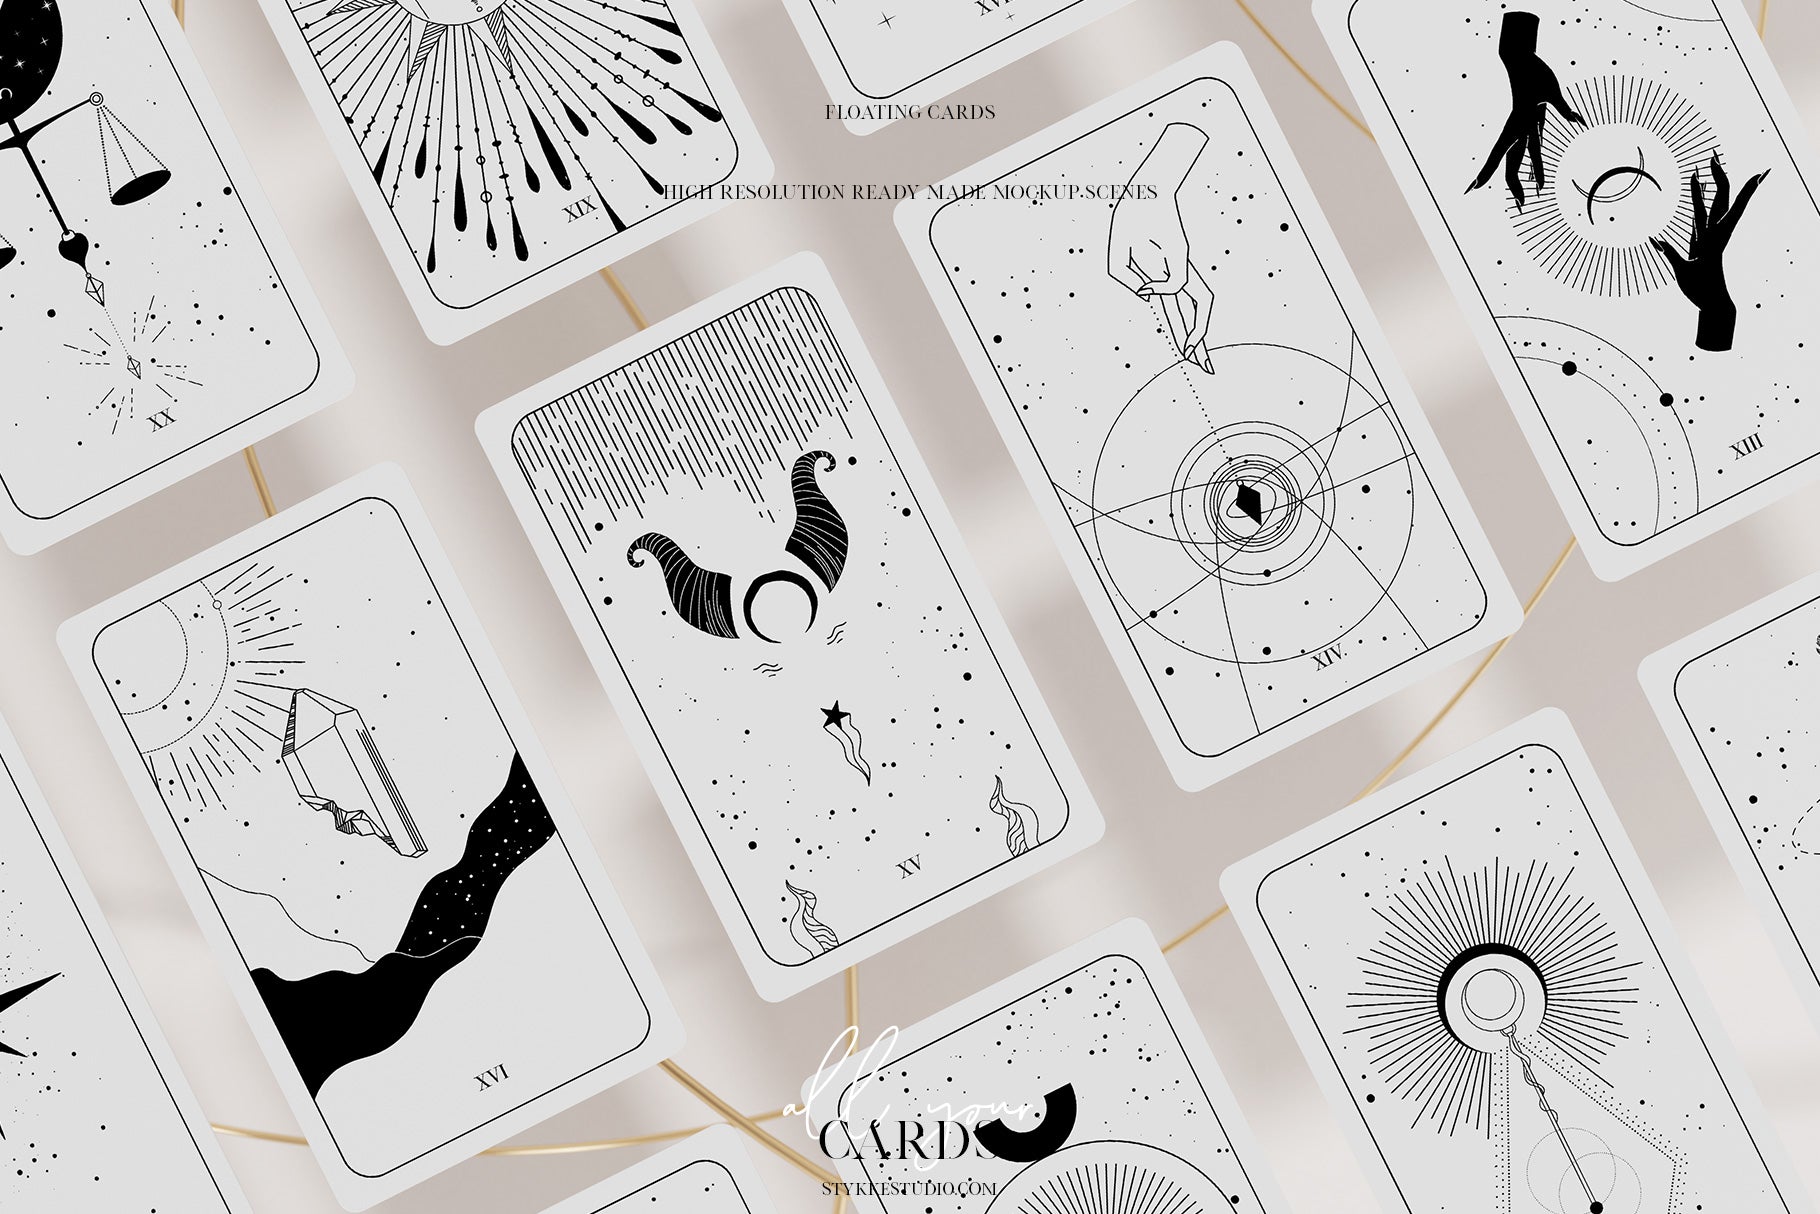 Mockup of 3 blank white tarot cards or learning cards and a deck